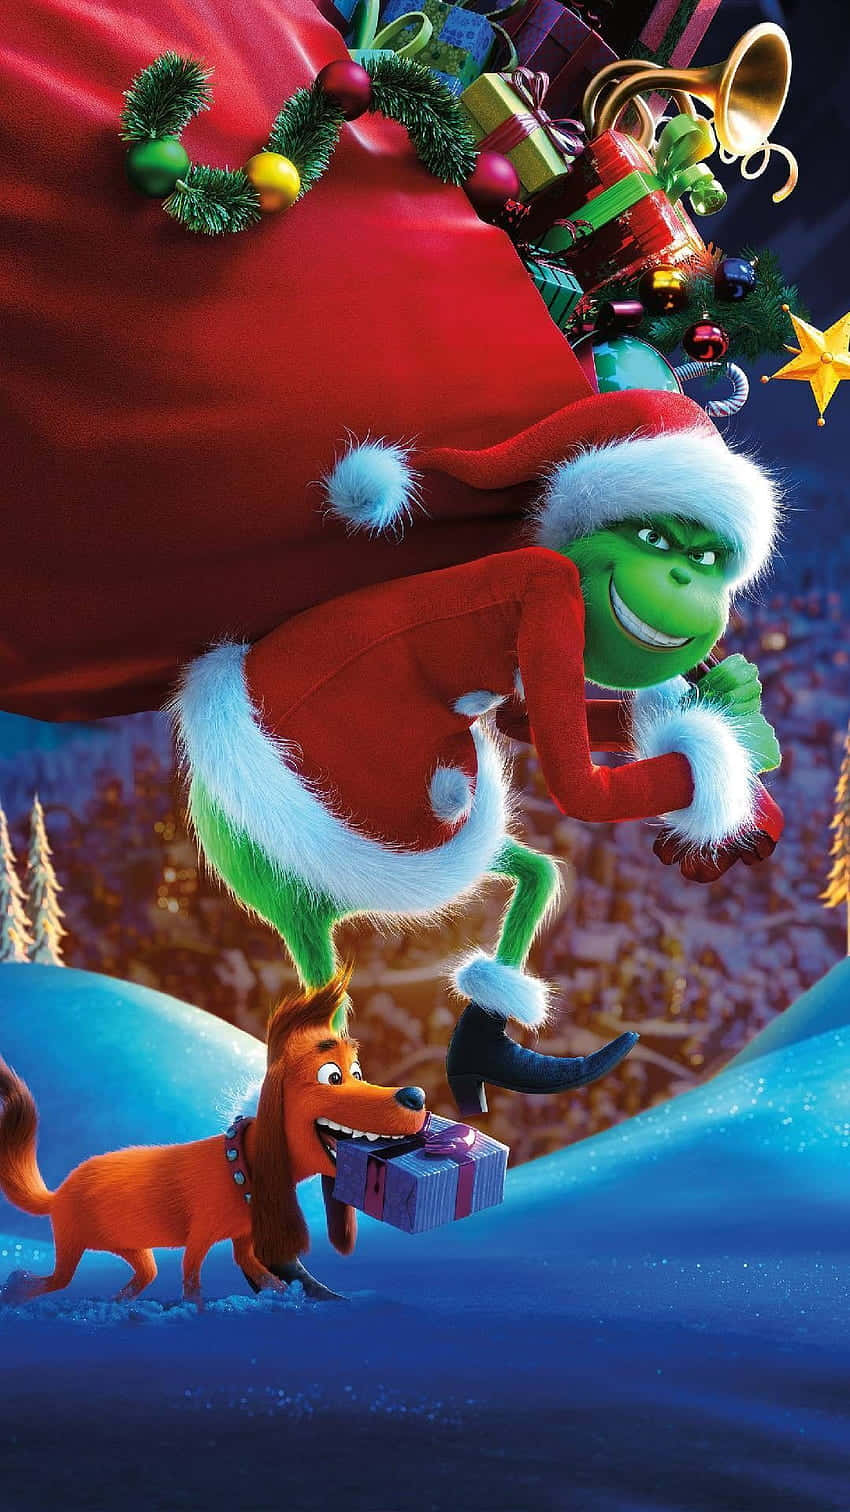 The Grinch Christmas Movie Wallpaper Wallpaper